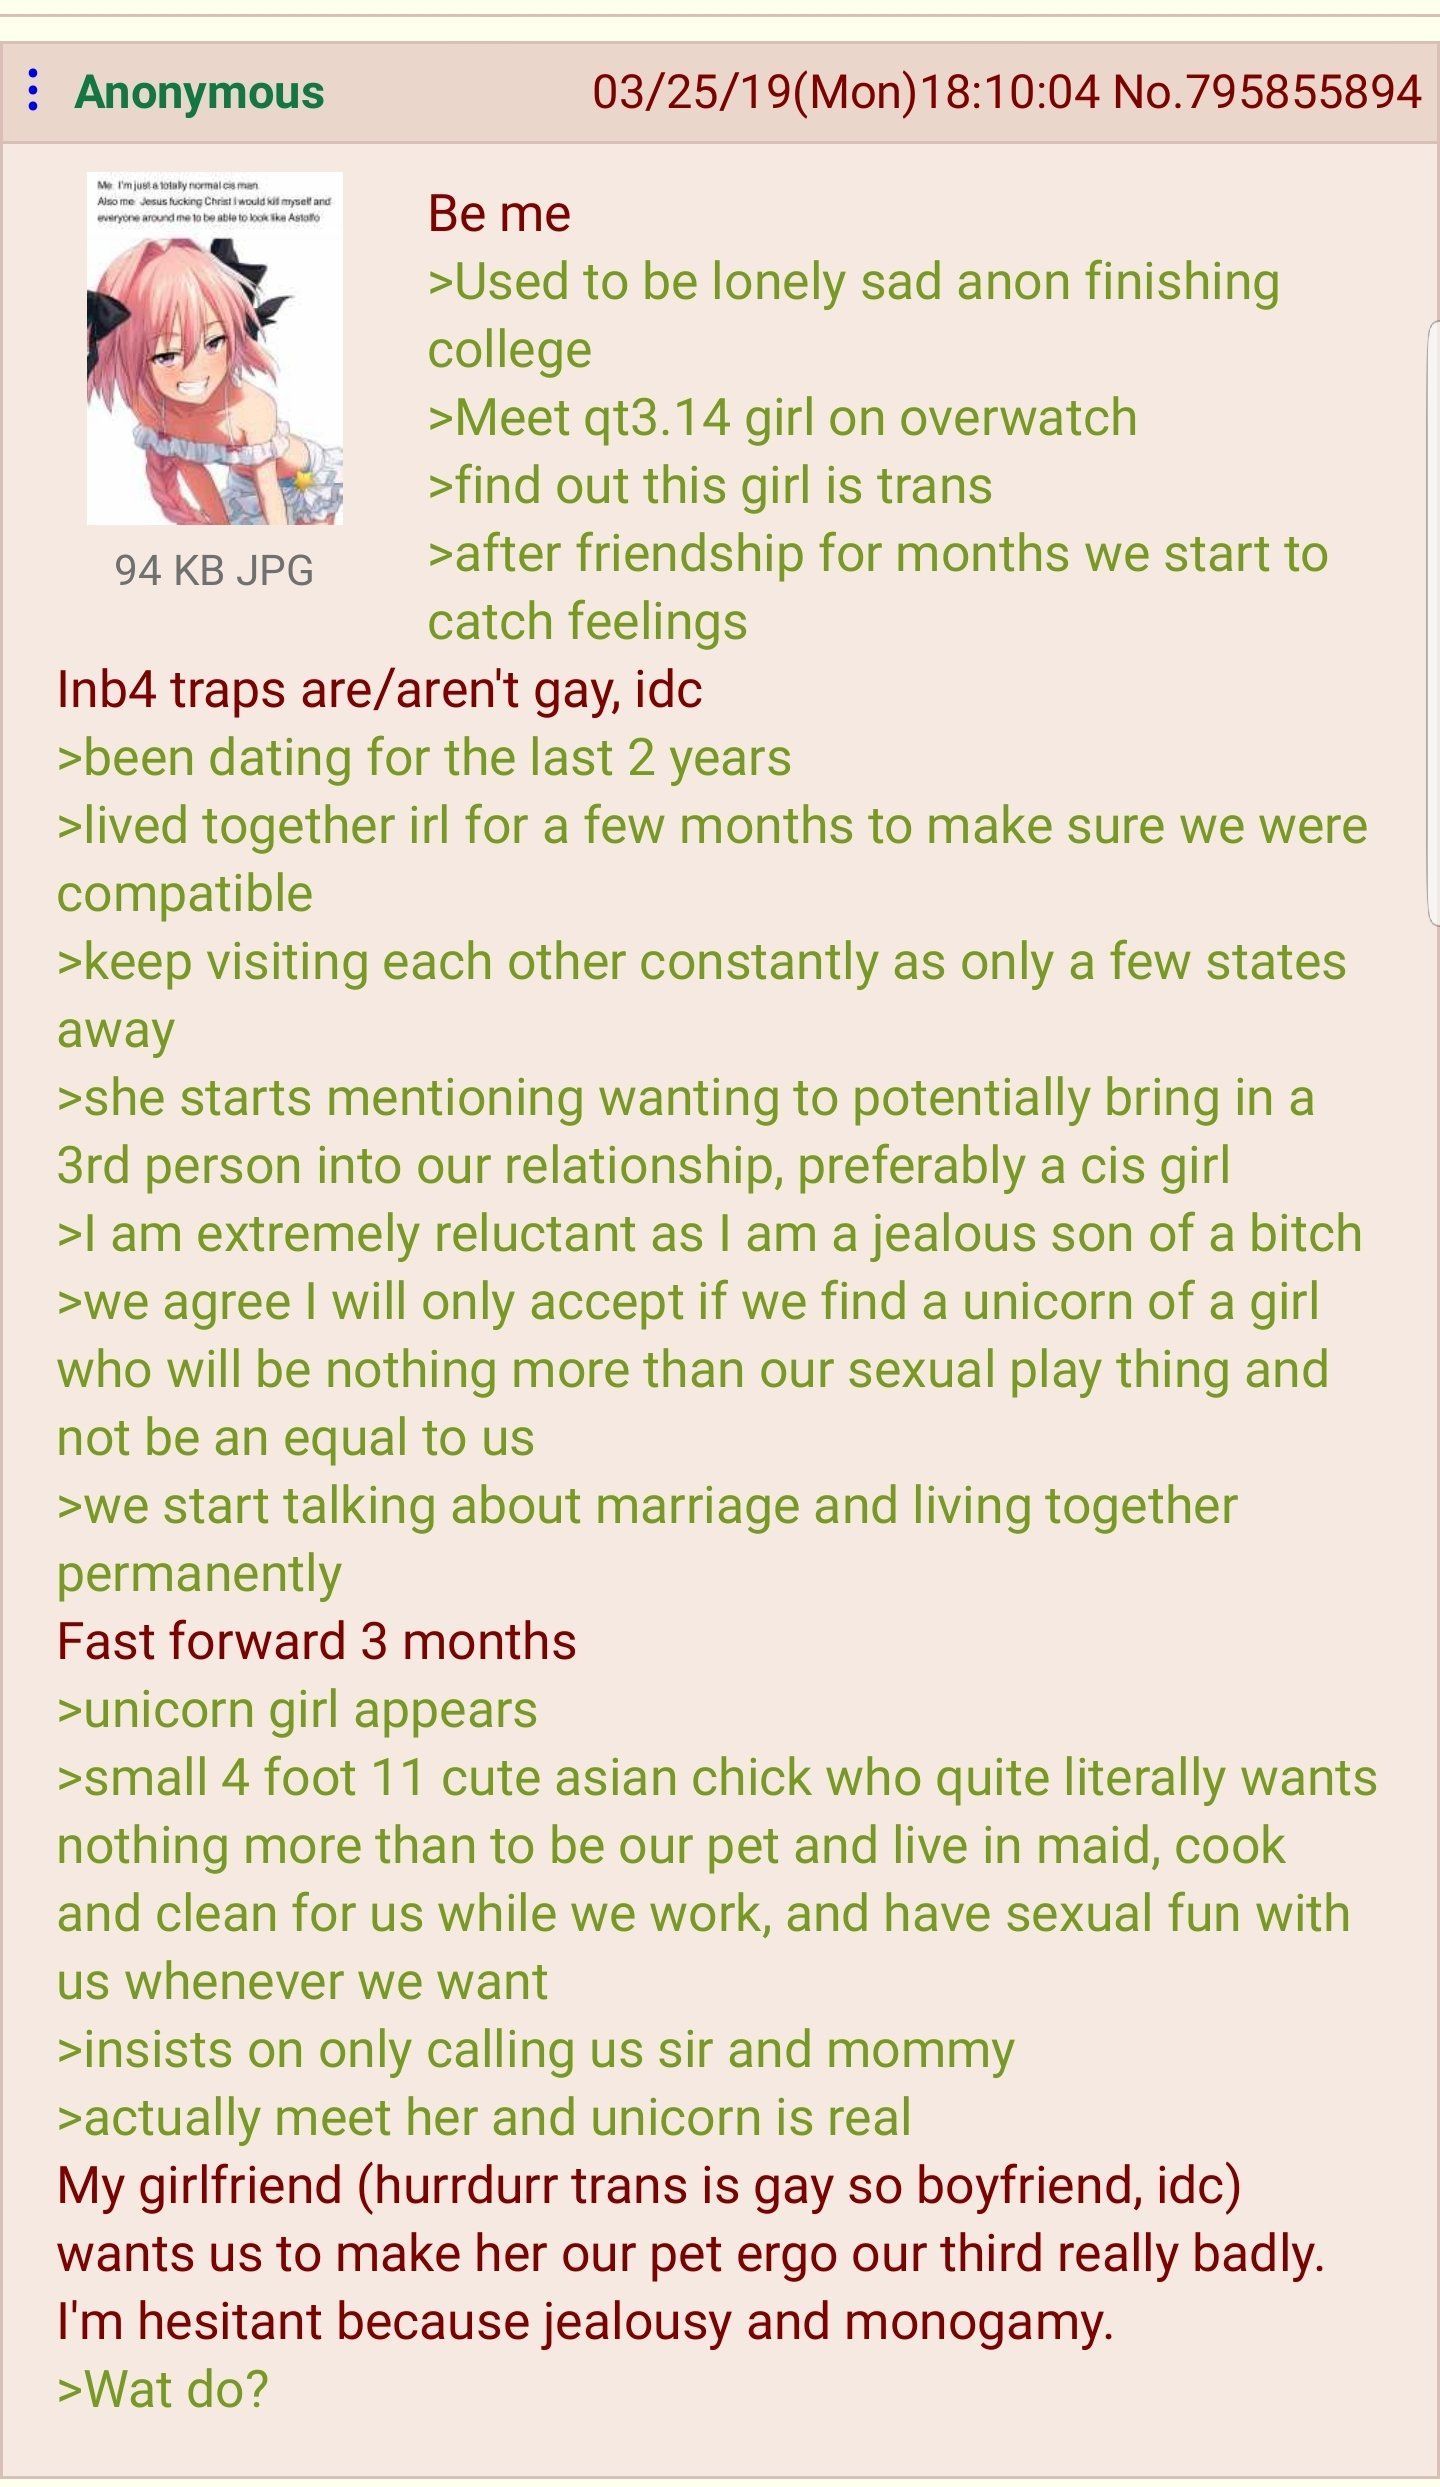 Anon and his pet